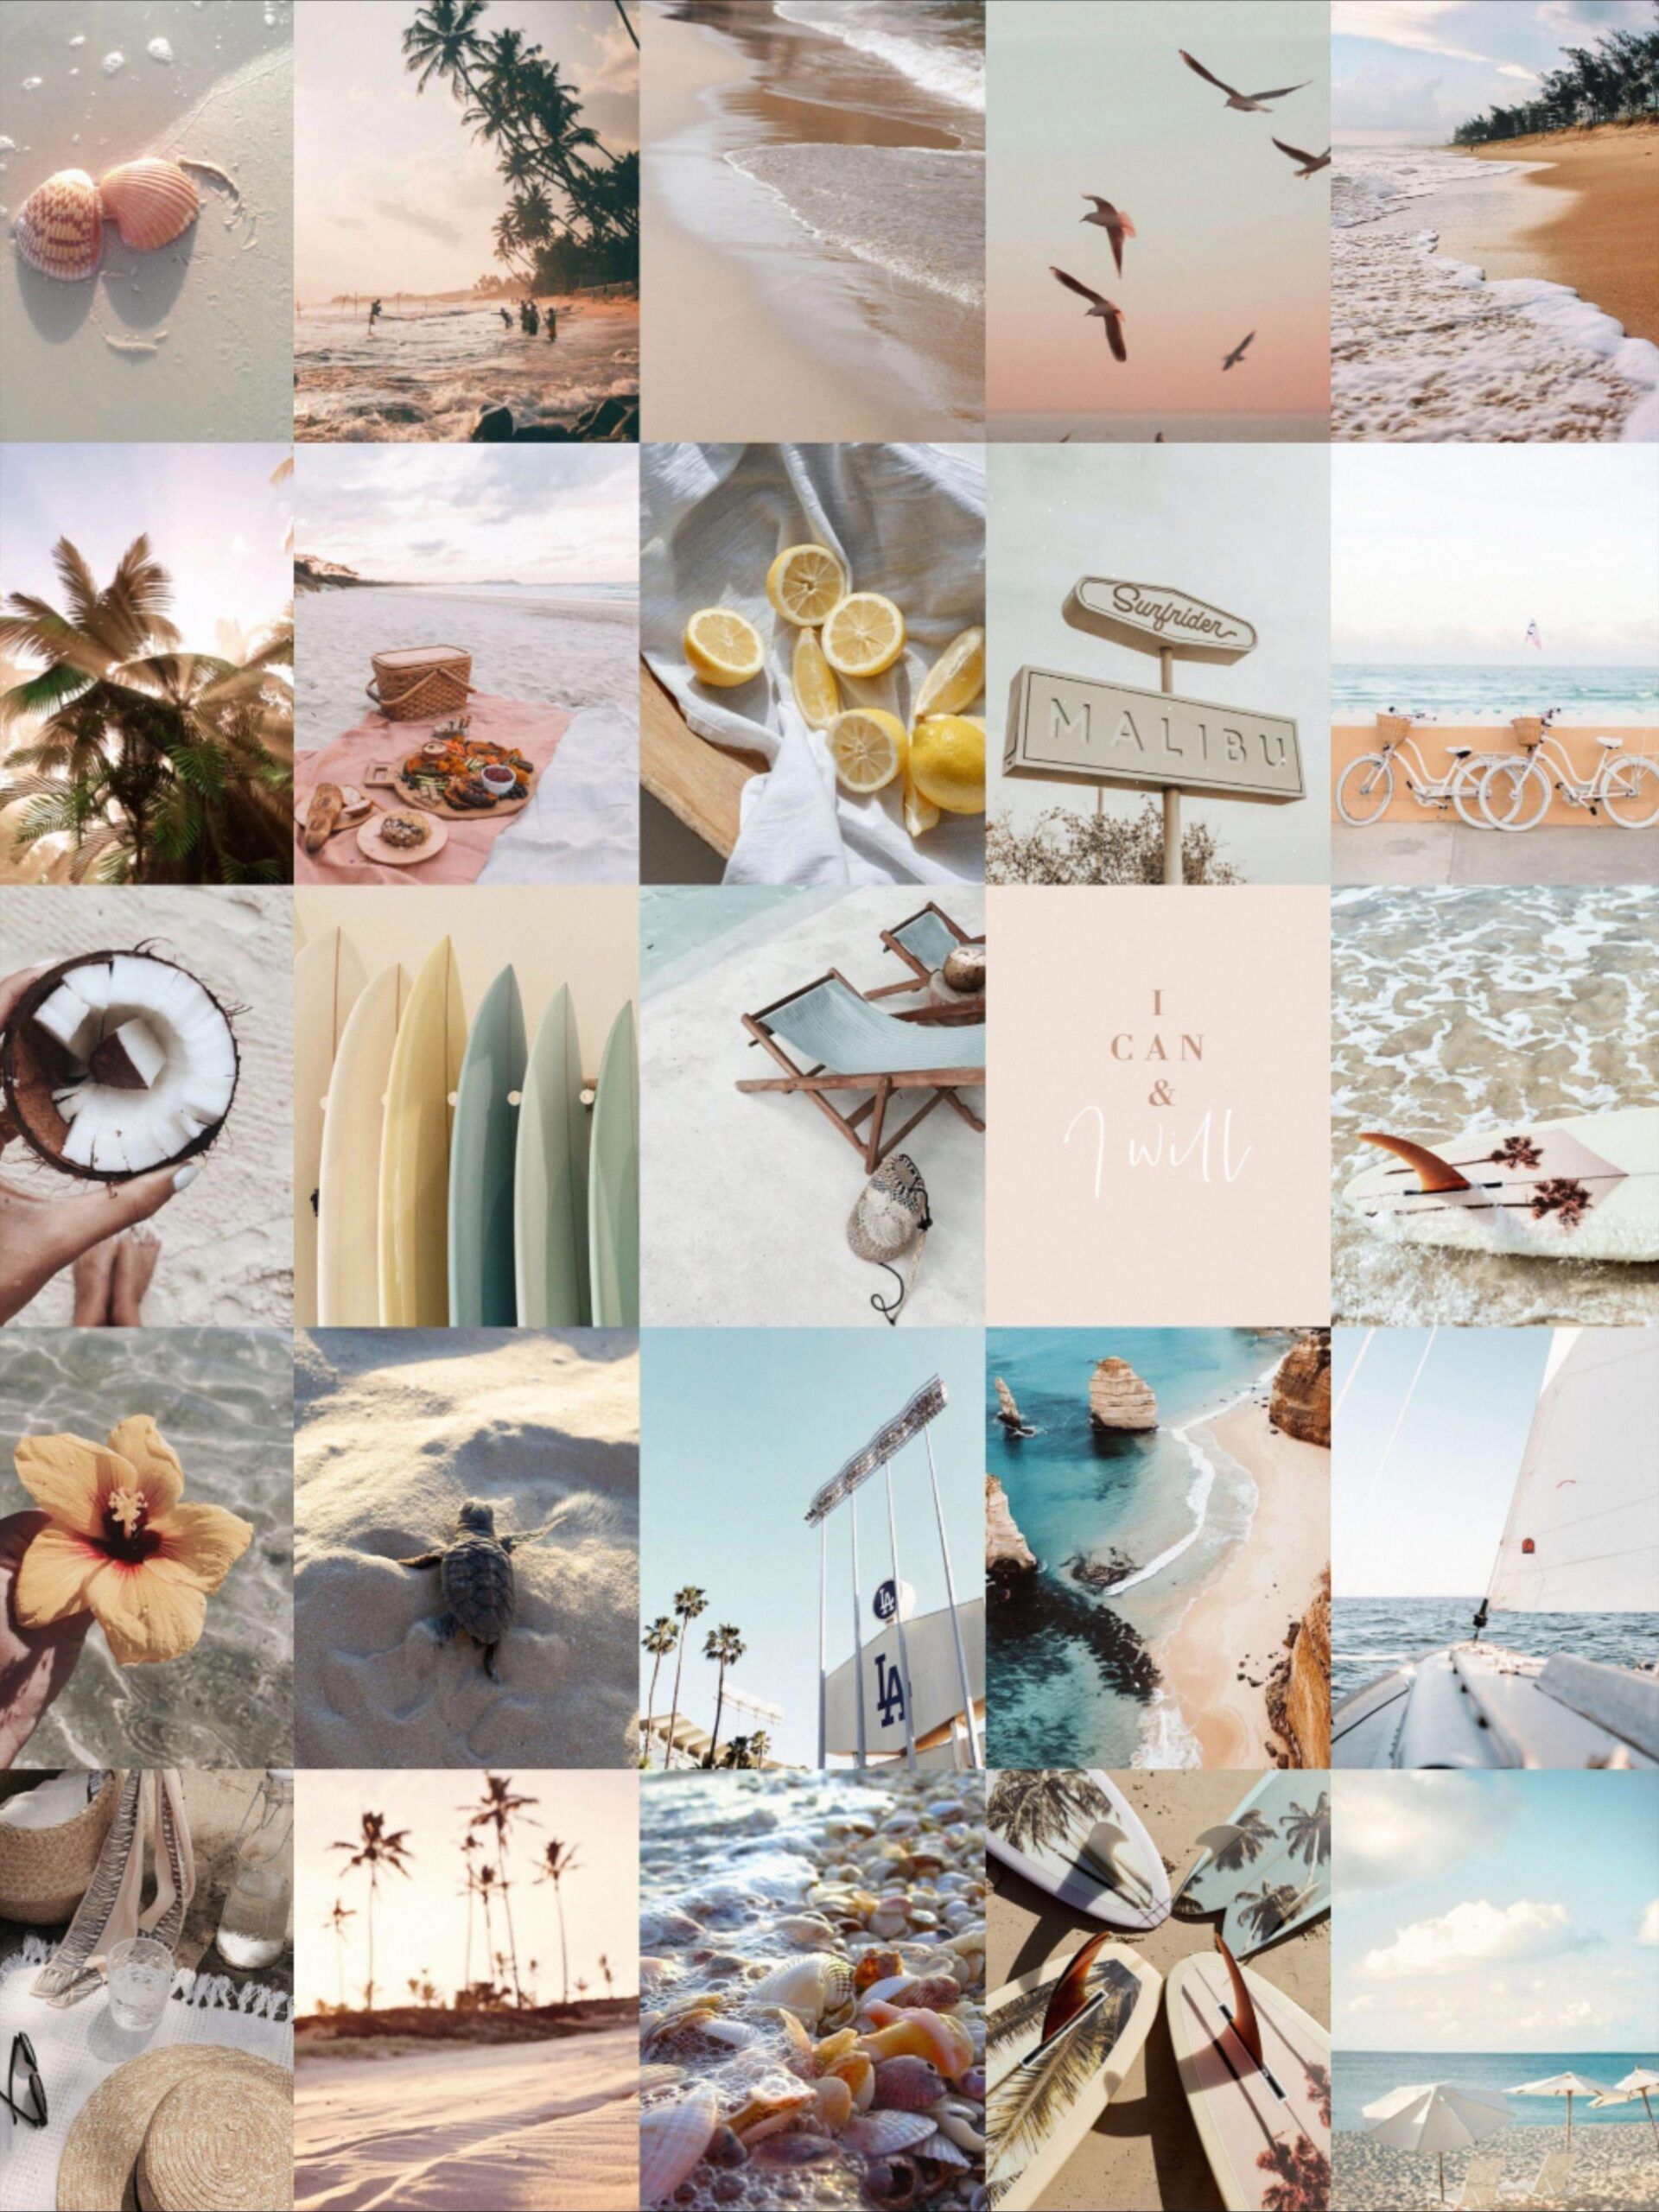 A collage of photos of the beach, surfboards, and seashells. - Collage